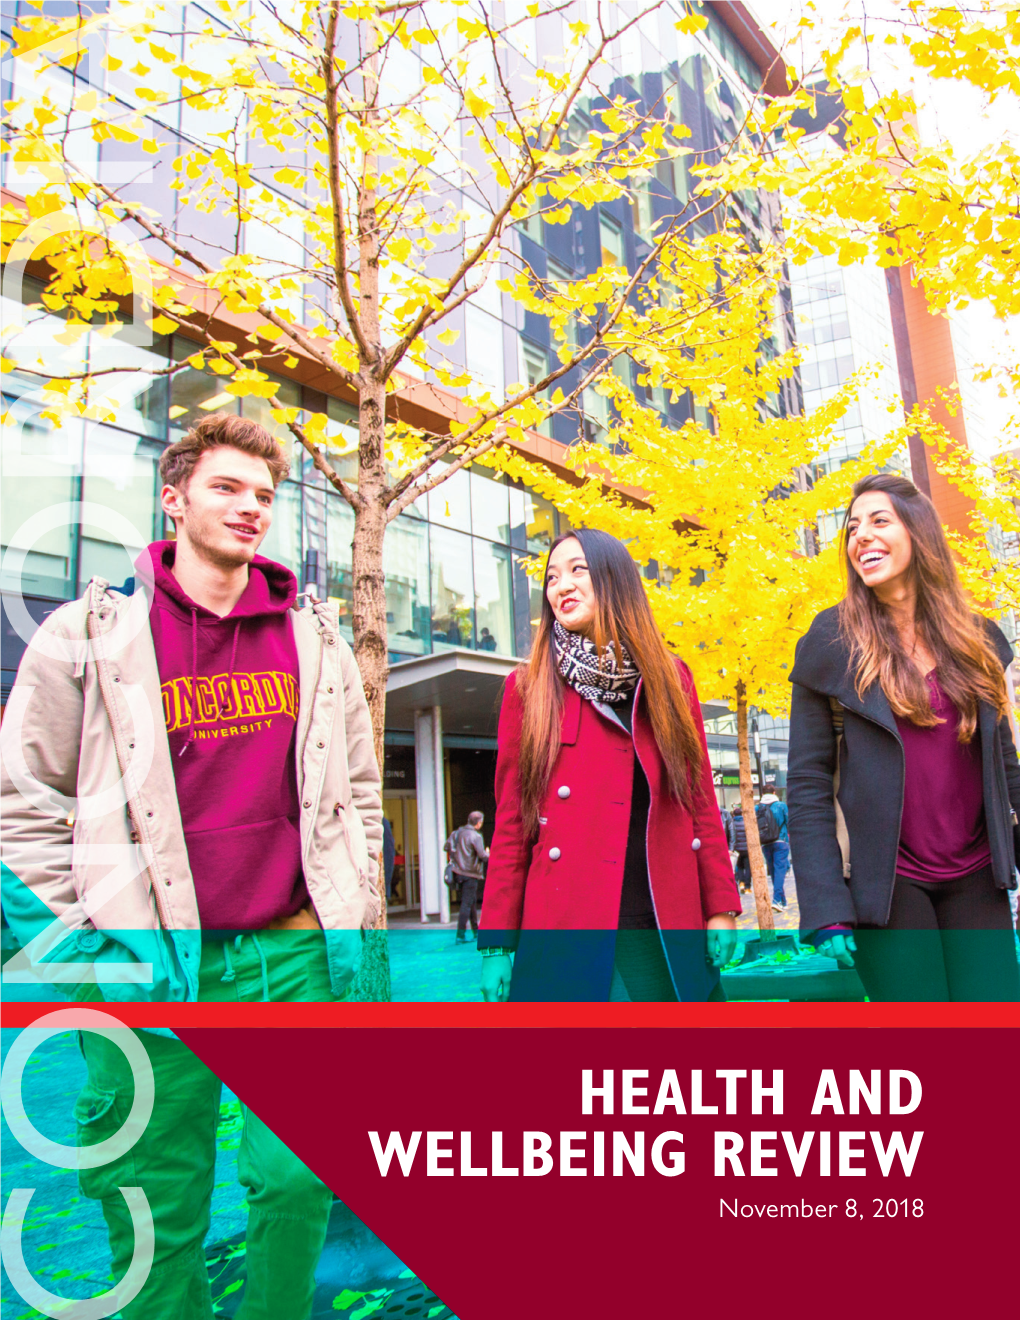 HEALTH and WELLBEING REVIEW November 8, 2018